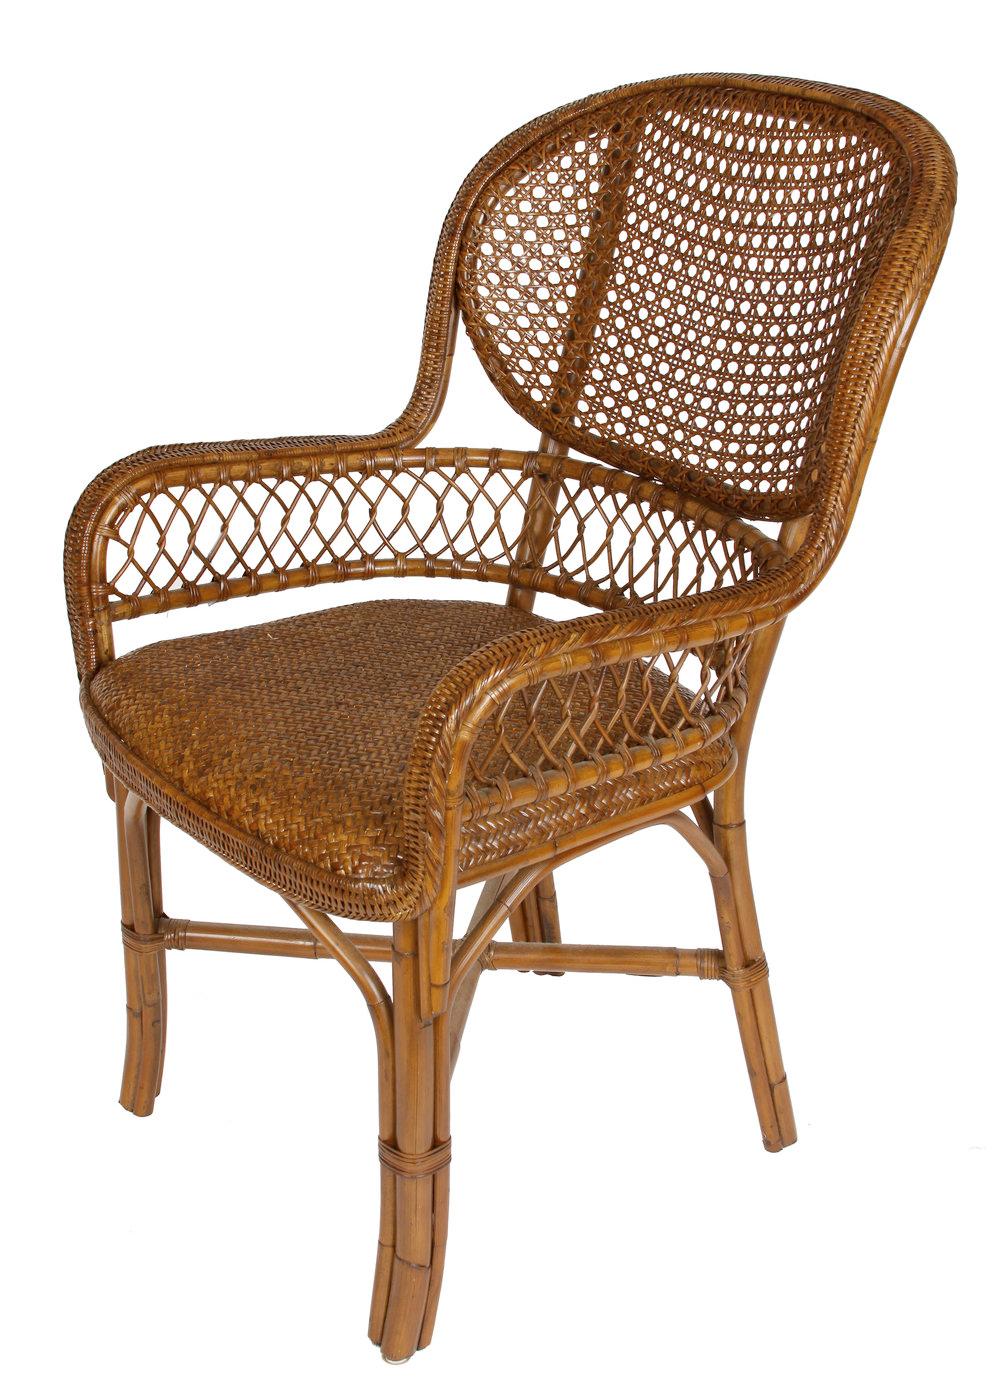 A set of four Palacek caned chairs with round back and arms.